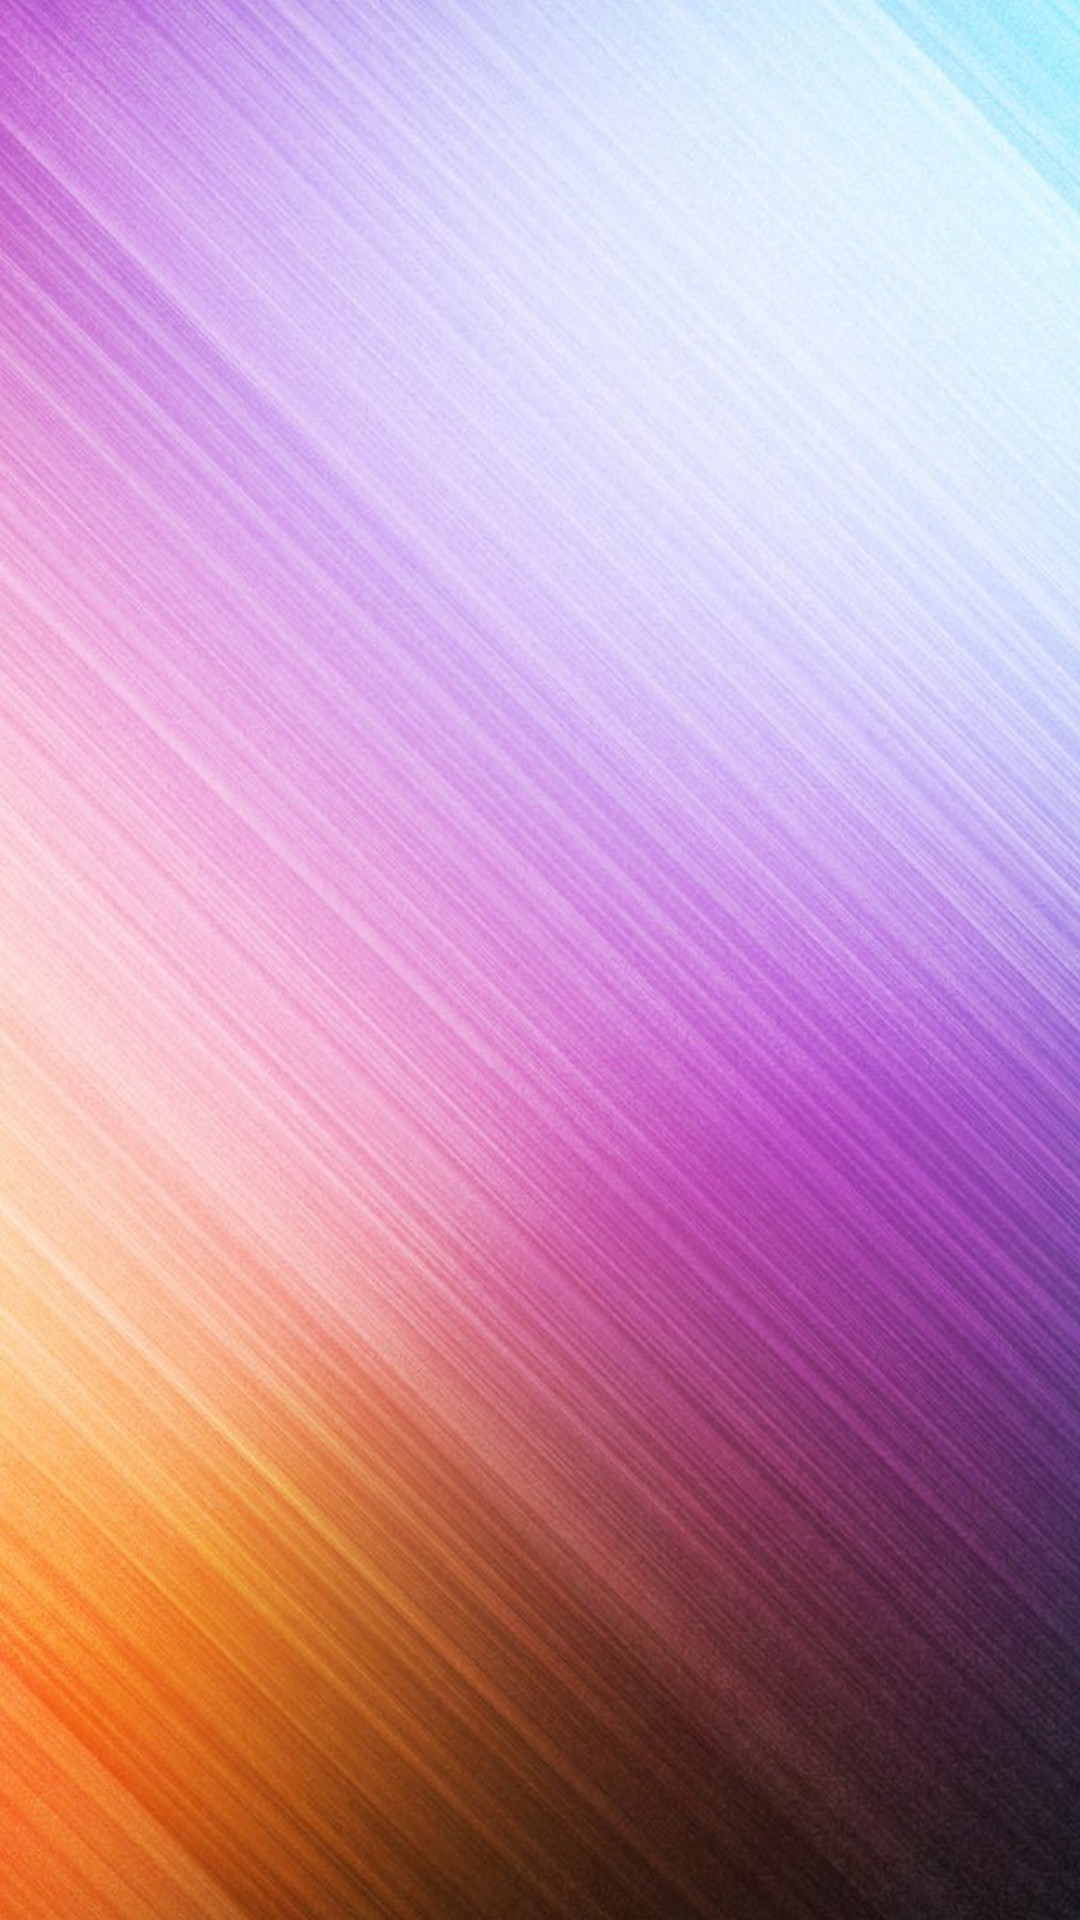 Light Colorful iPhone 6 Wallpaper With high-resolution 1080X1920 pixel. You can use this wallpaper for your iPhone 5, 6, 7, 8, X, XS, XR backgrounds, Mobile Screensaver, or iPad Lock Screen